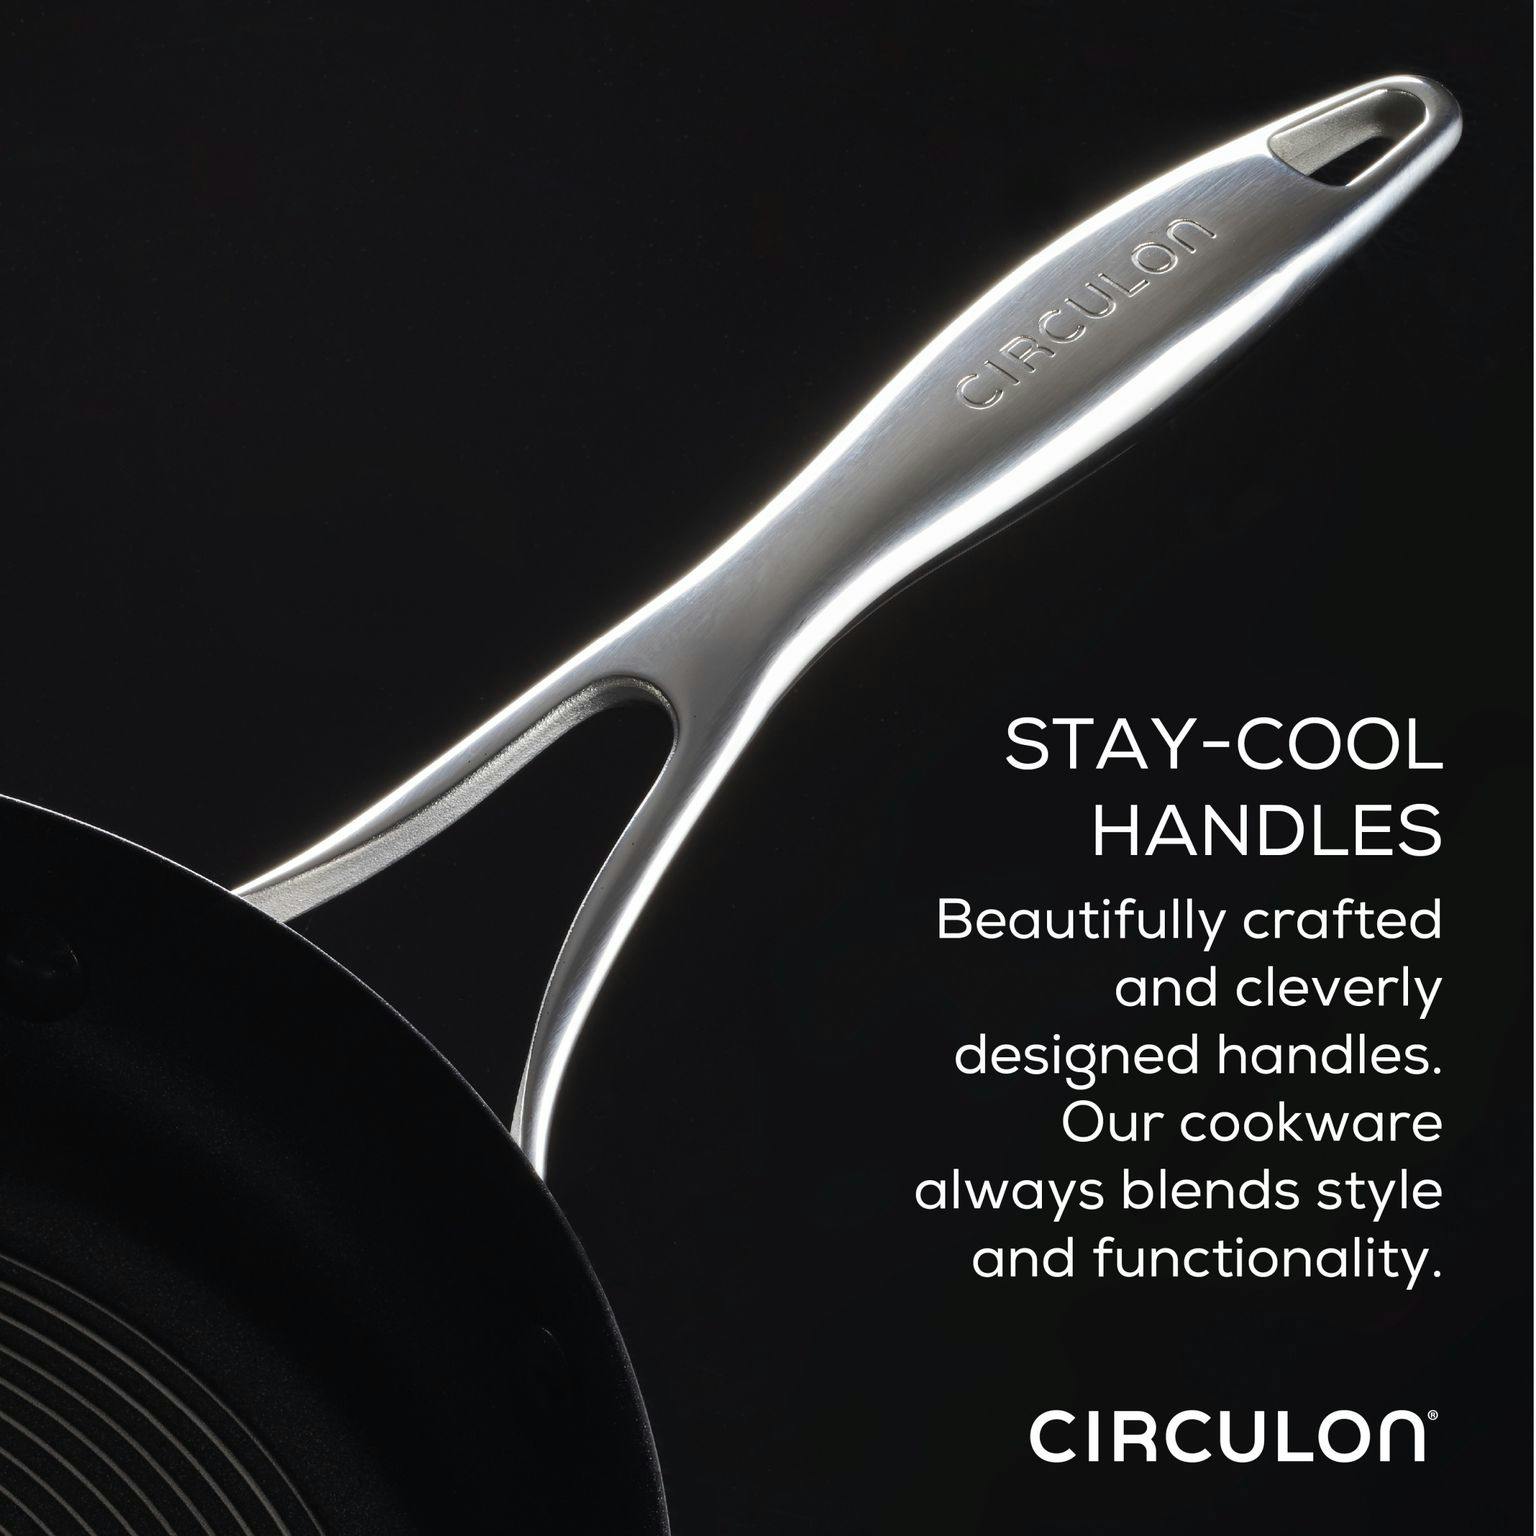 Circulon Stainless Steel Induction Frying Pan with SteelShield Hybrid Stainless and Nonstick Technology and Spatula, 9.5-Inch, Silver